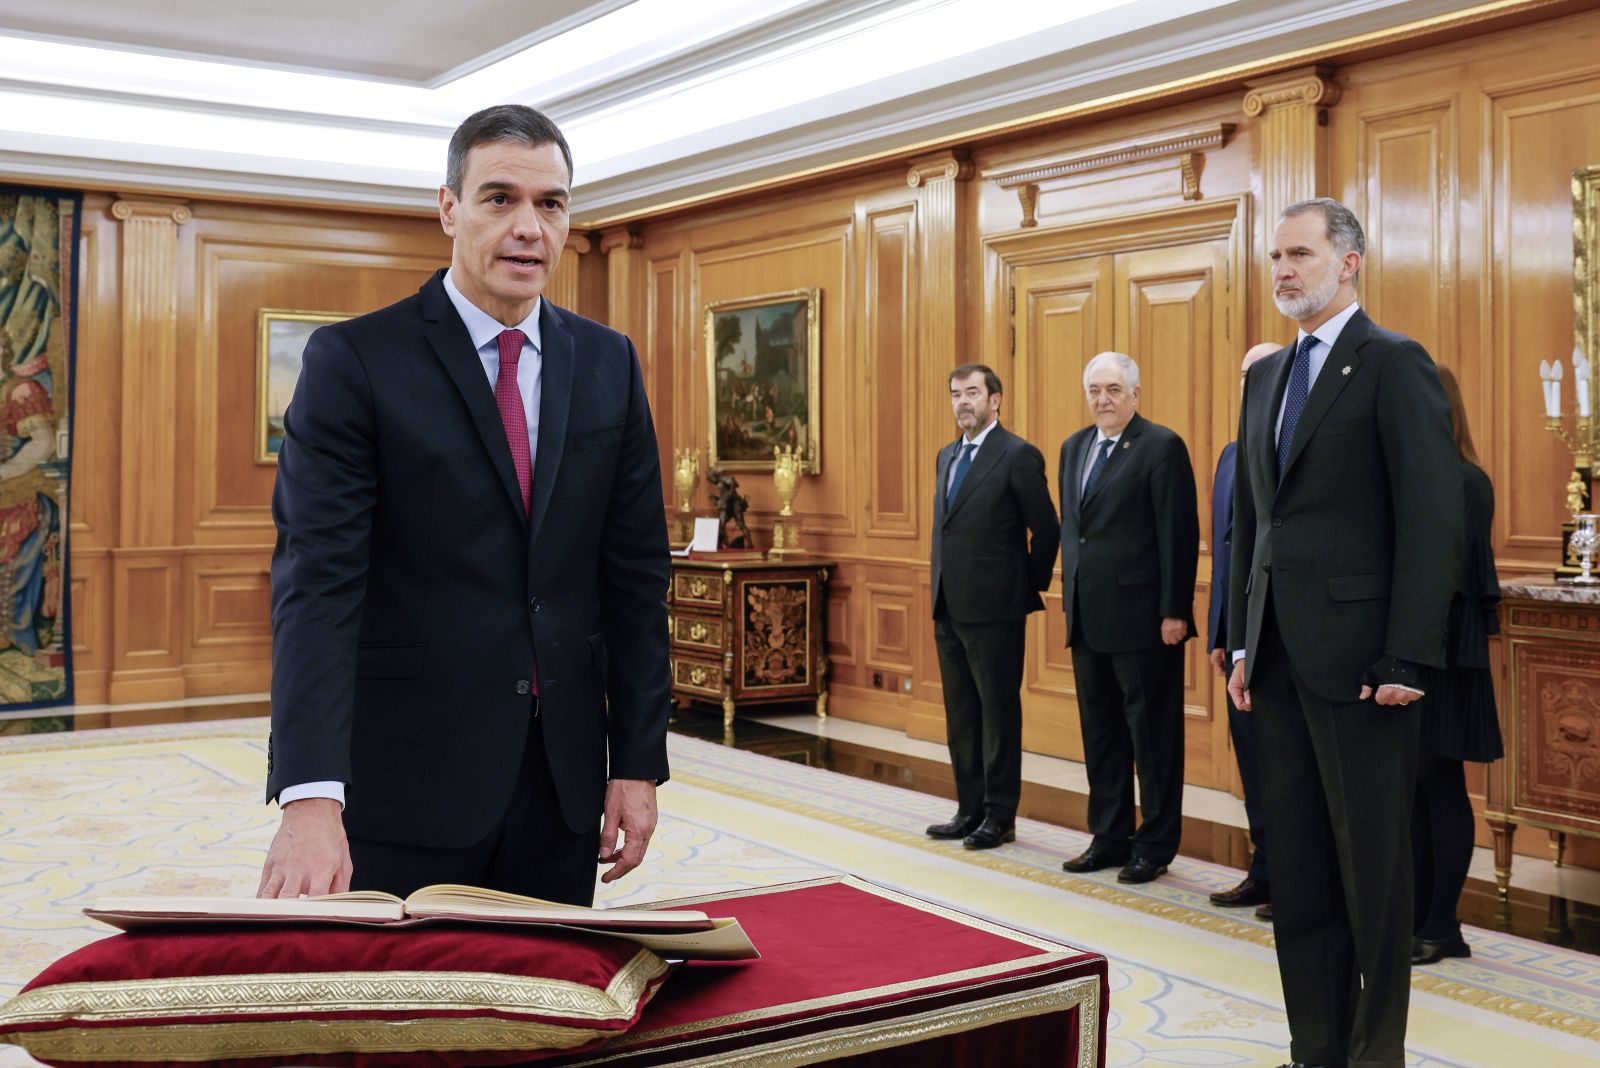 epa10980264 Pedro Sanchez (L) is sworn in as Prime Minister before Spain's King Felipe VI (R) and the Constitution at the Zarzuela Palace, in Madrid, Spain, 17 November 2023. The Spanish parliament confirmed Pedro Sanchez as prime minister on 16 November, bringing an end to months of political uncertainty in the country. Sanchez secured 179 votes, three more than the required absolute majority in the 350-member house.  EPA/BALLESTEROS / POOL